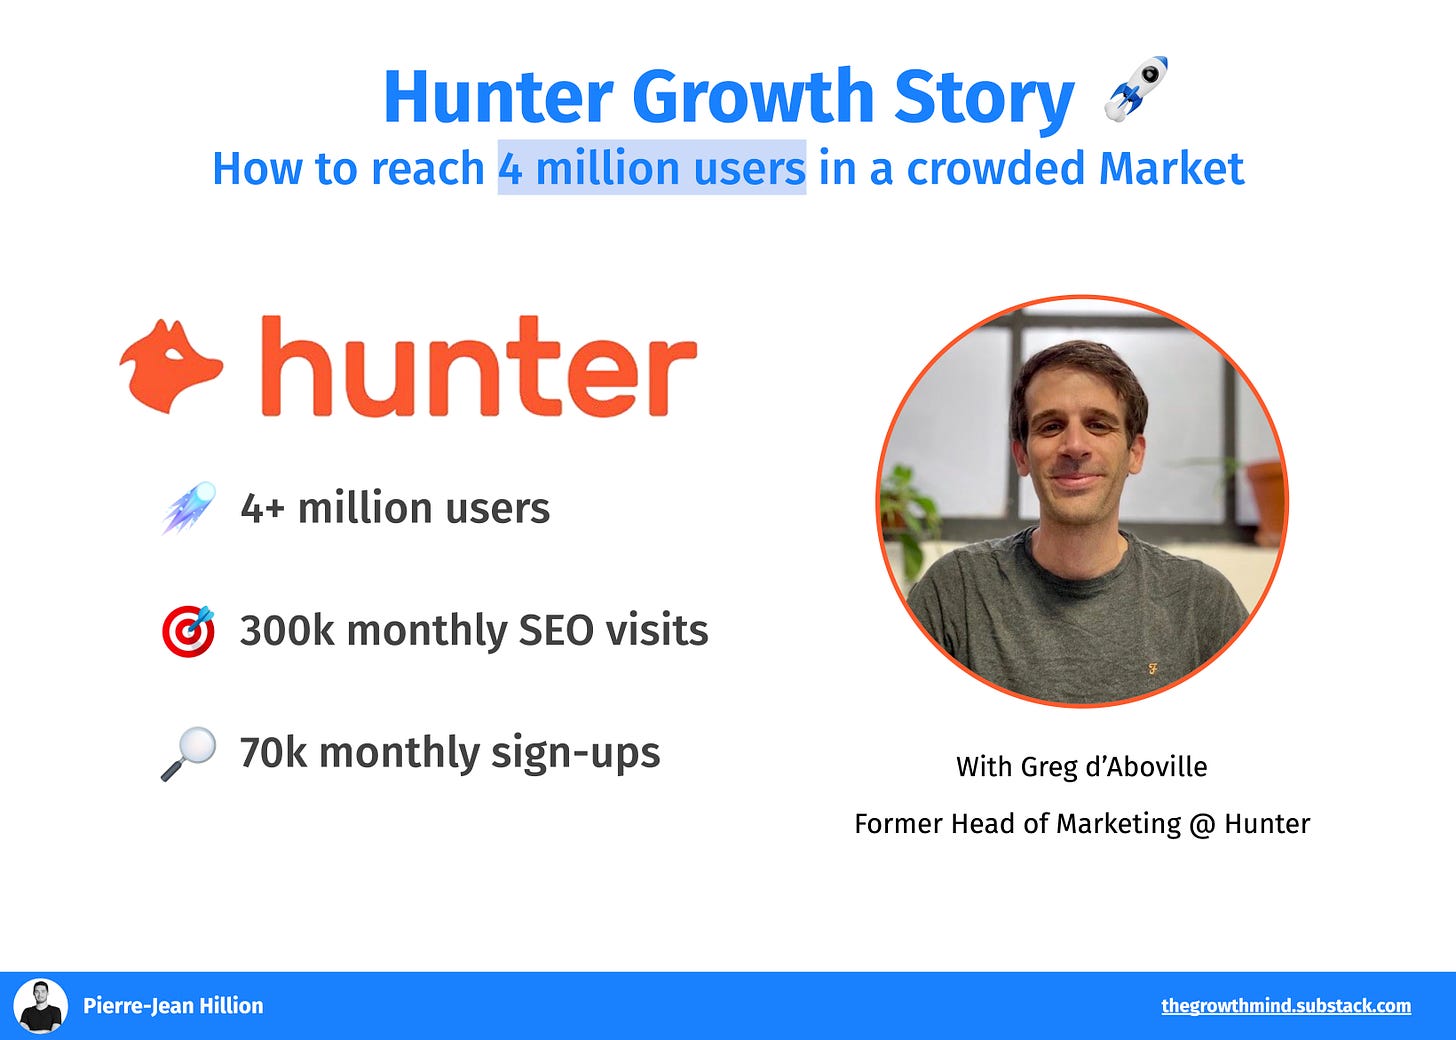 Hunter Growth Story: how to reach 4 million users